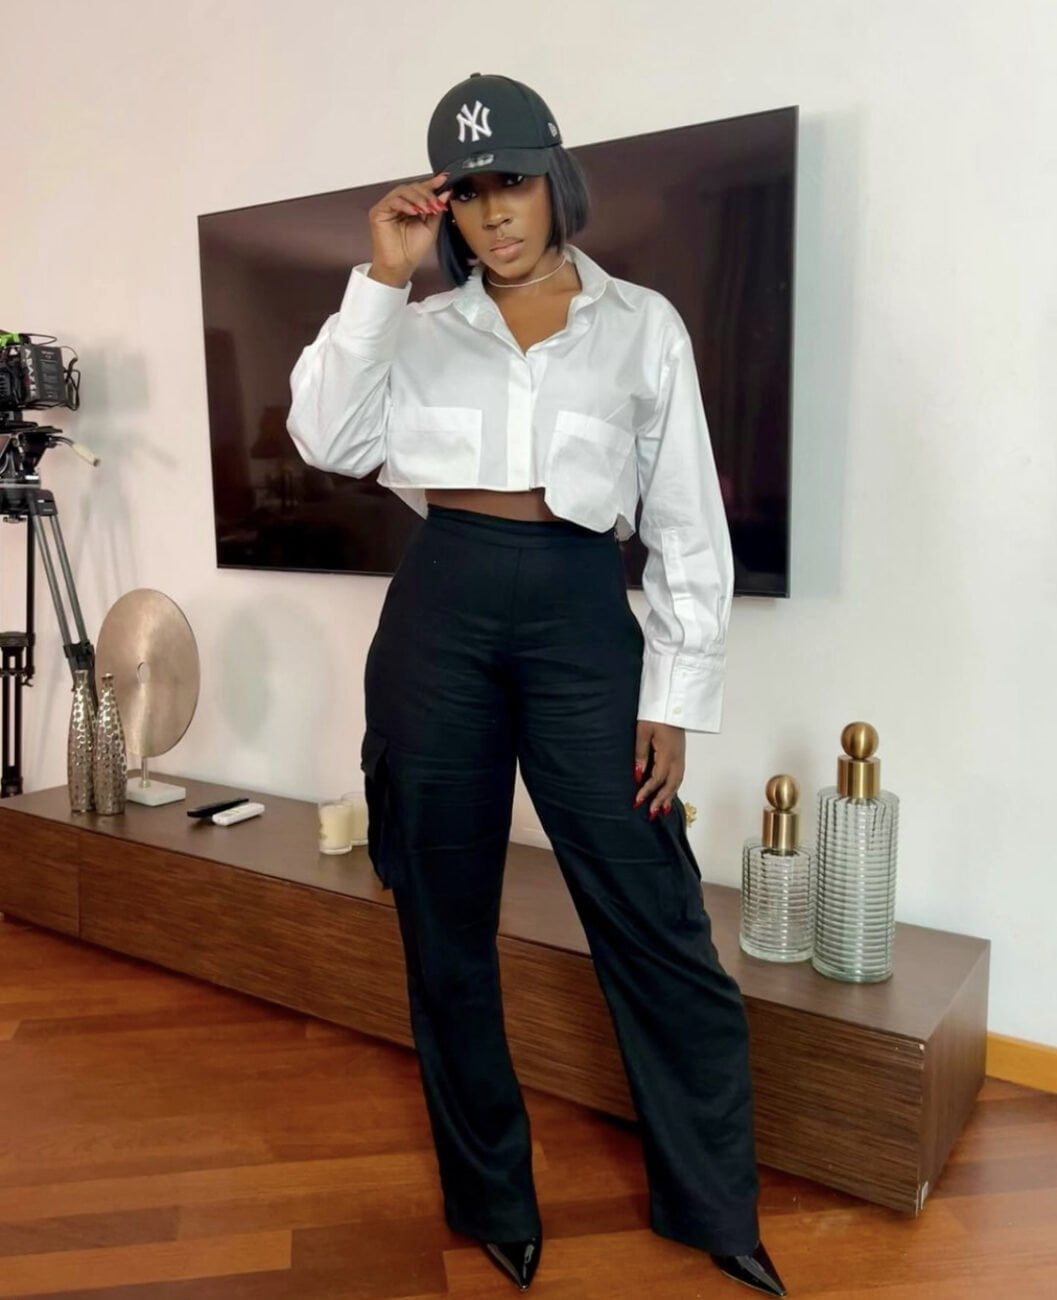 A simple yet impactful look: Bverly Naya stuns in a crop top and cargo pants.